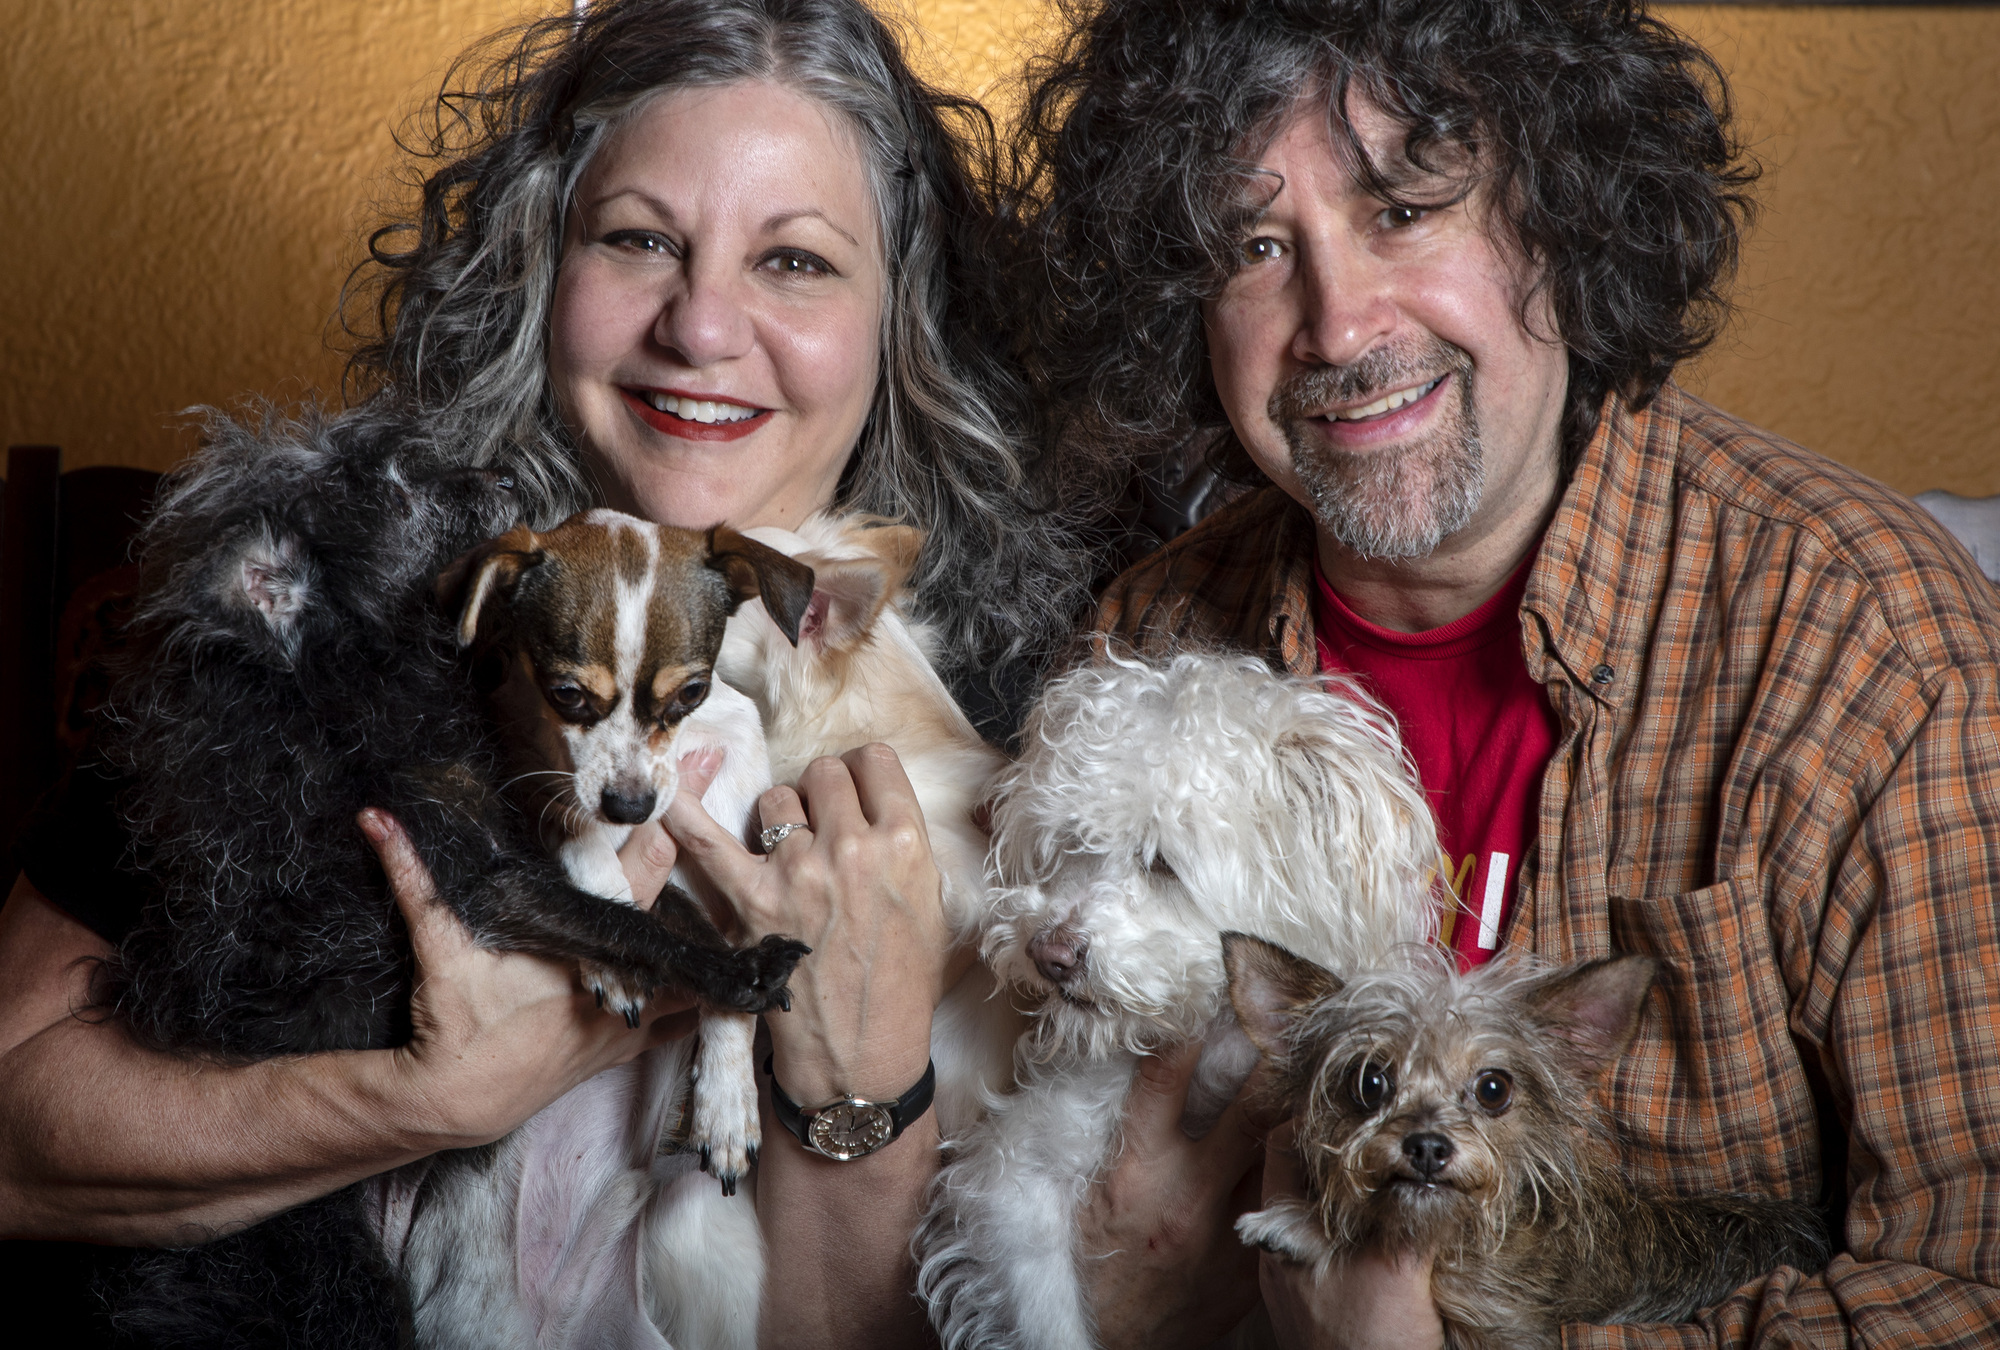 Minneapolis couple Sally and Chris Mars turn their talents toward rescuing  dogs